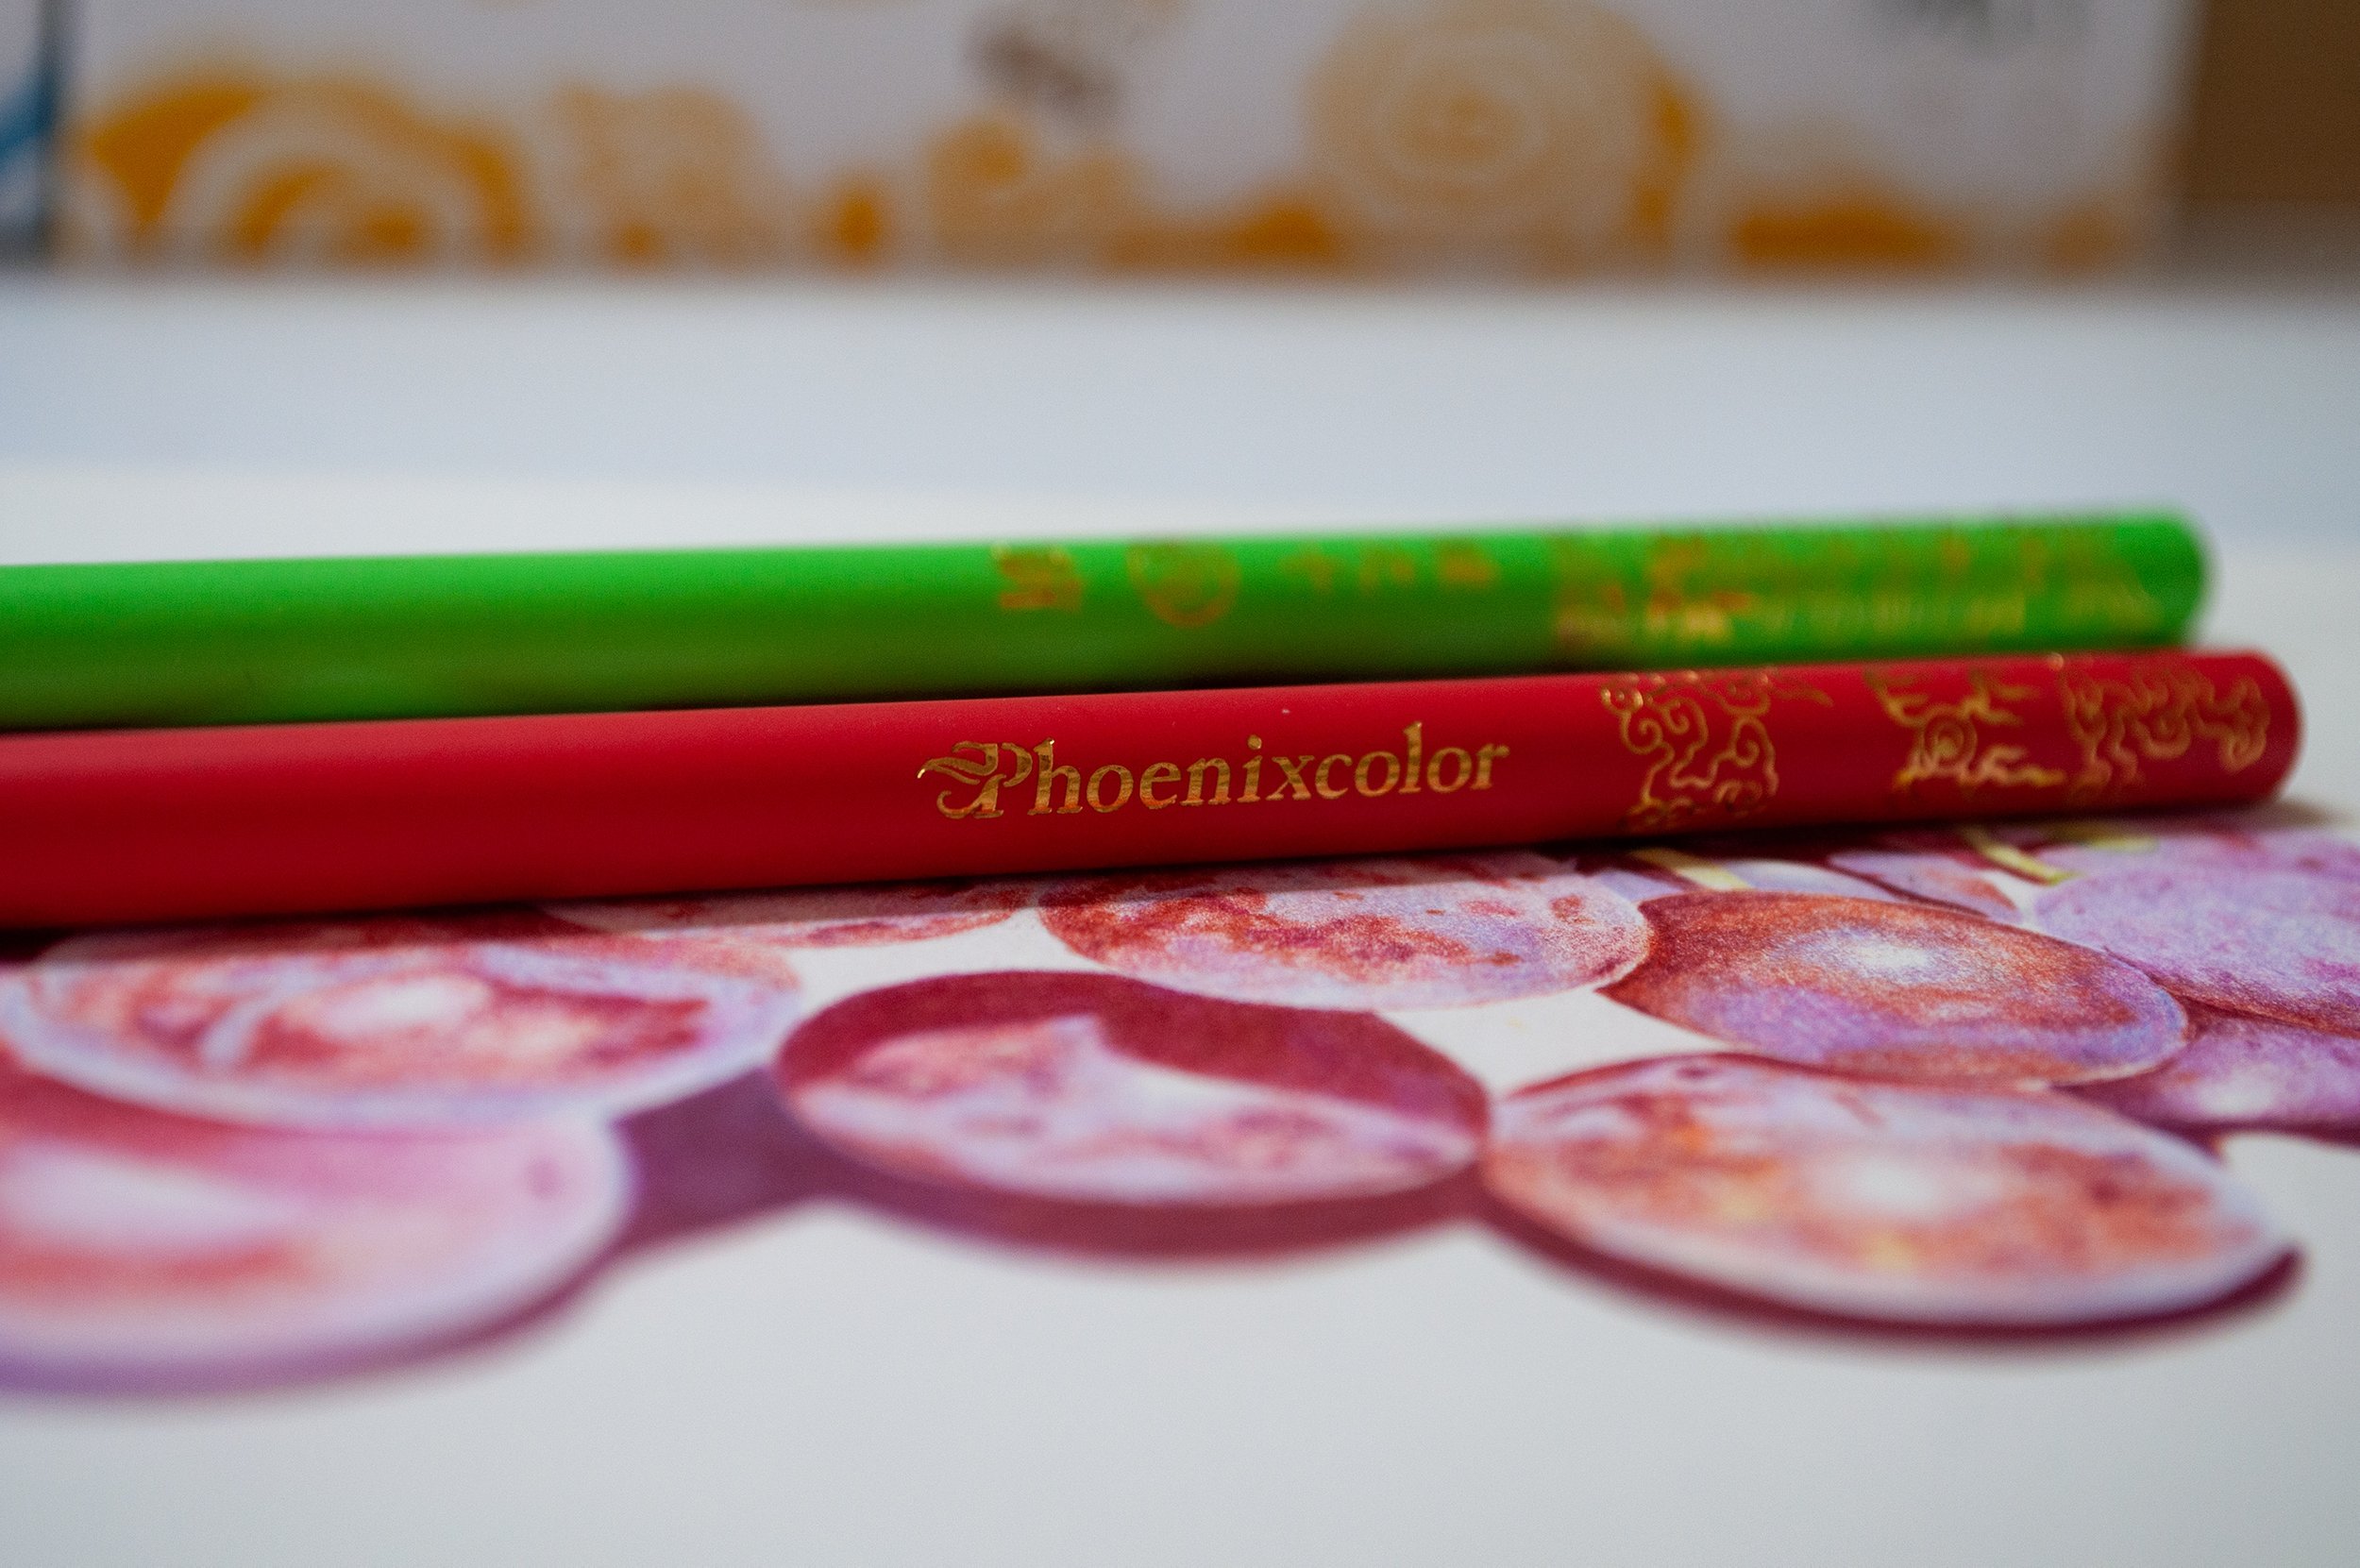 What do These Remind You of? Phoenixcolor soft colored pencil review 